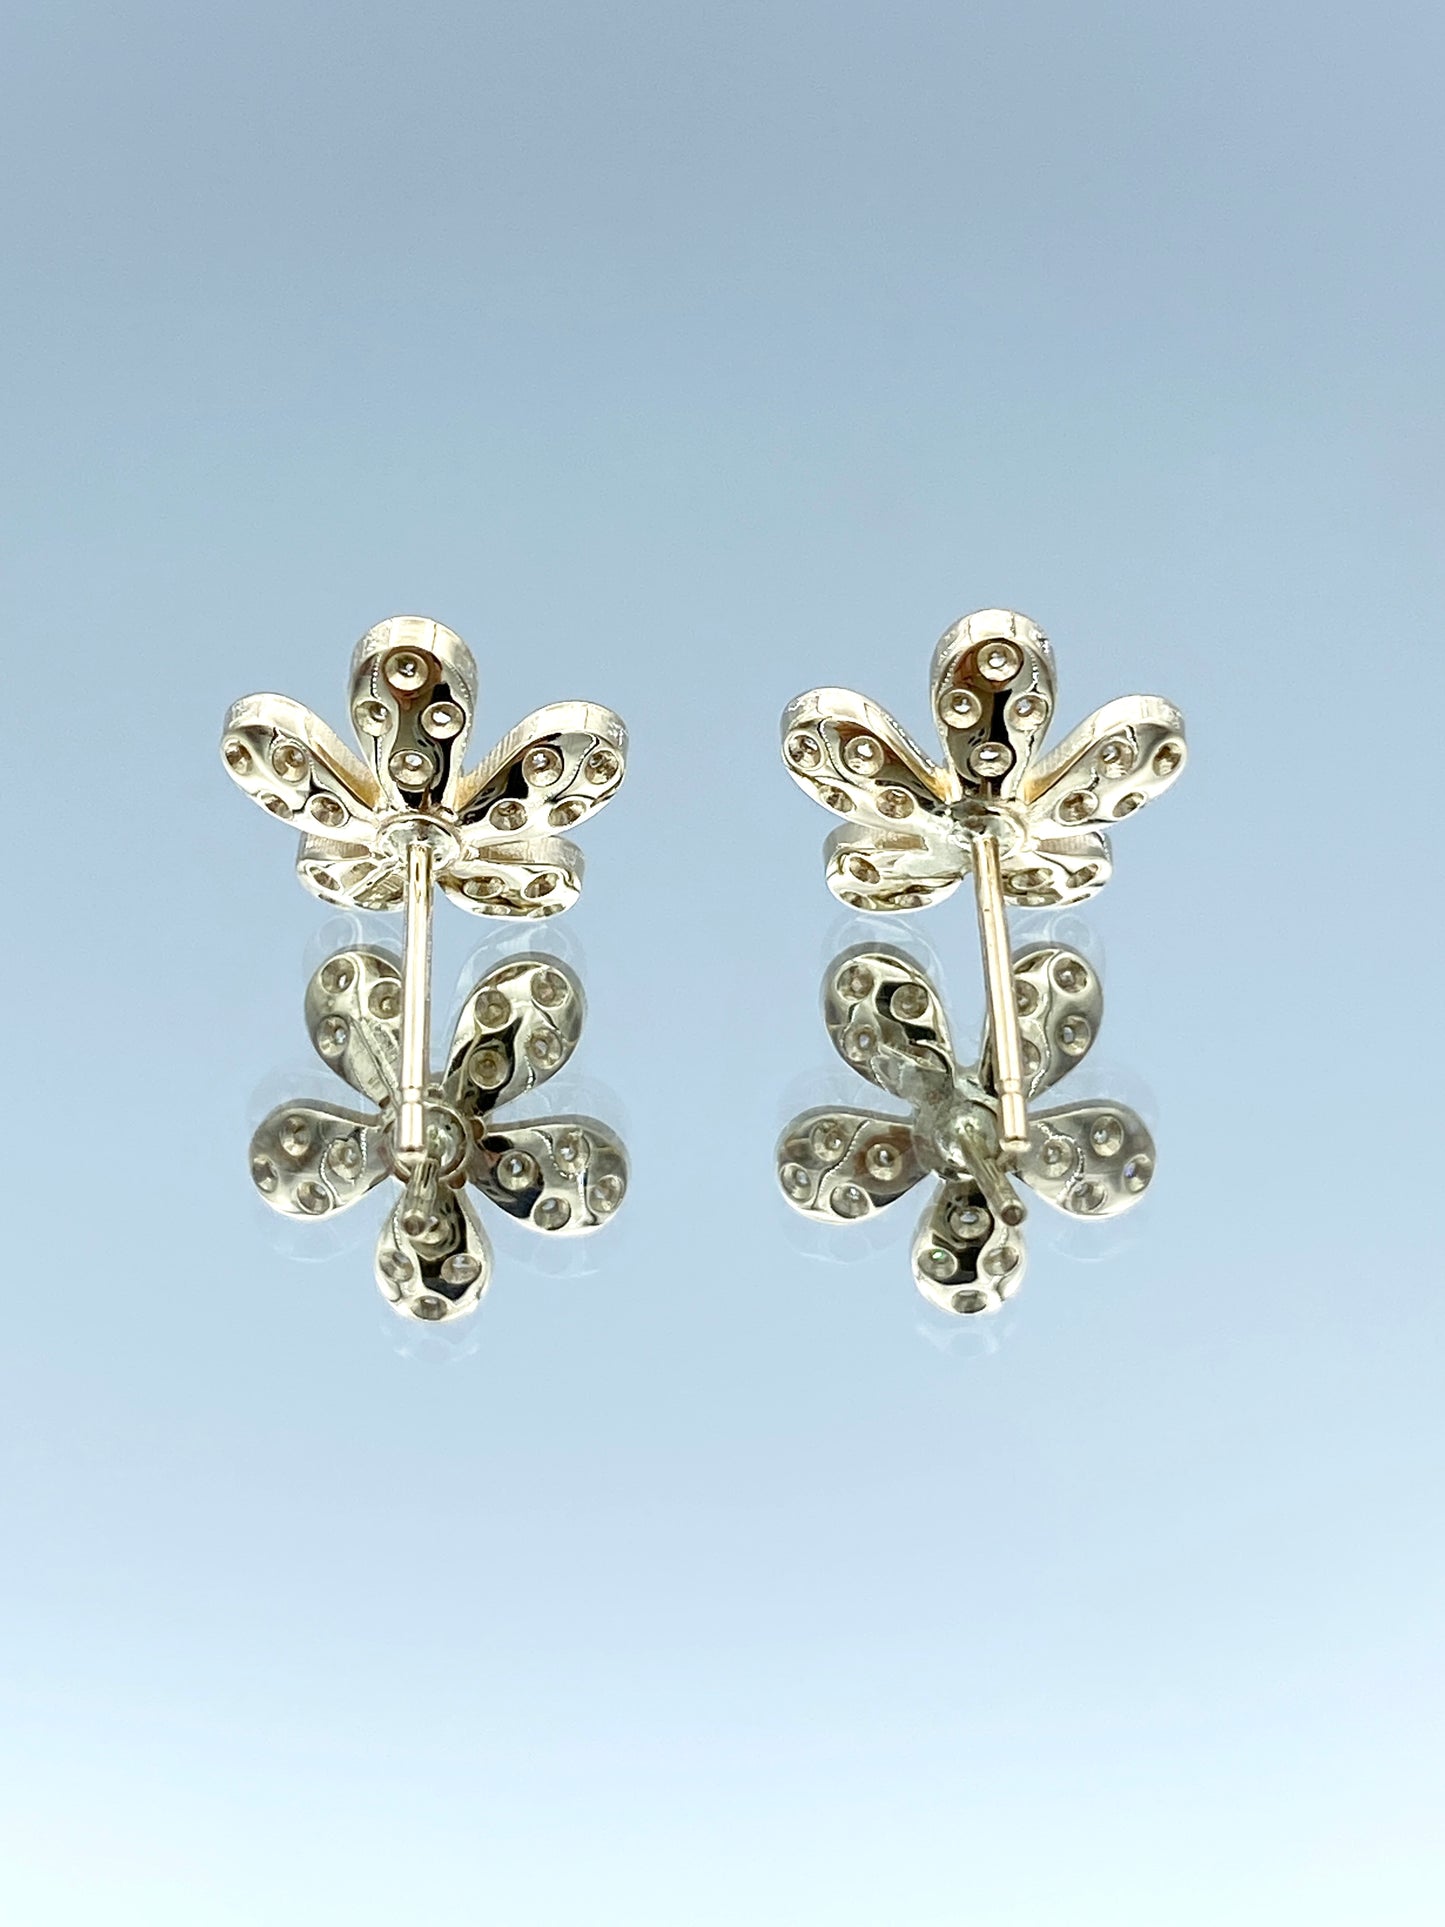 Floral Shape Diamond Stud Earrings in 14K Yellow Gold - L and L Jewelry